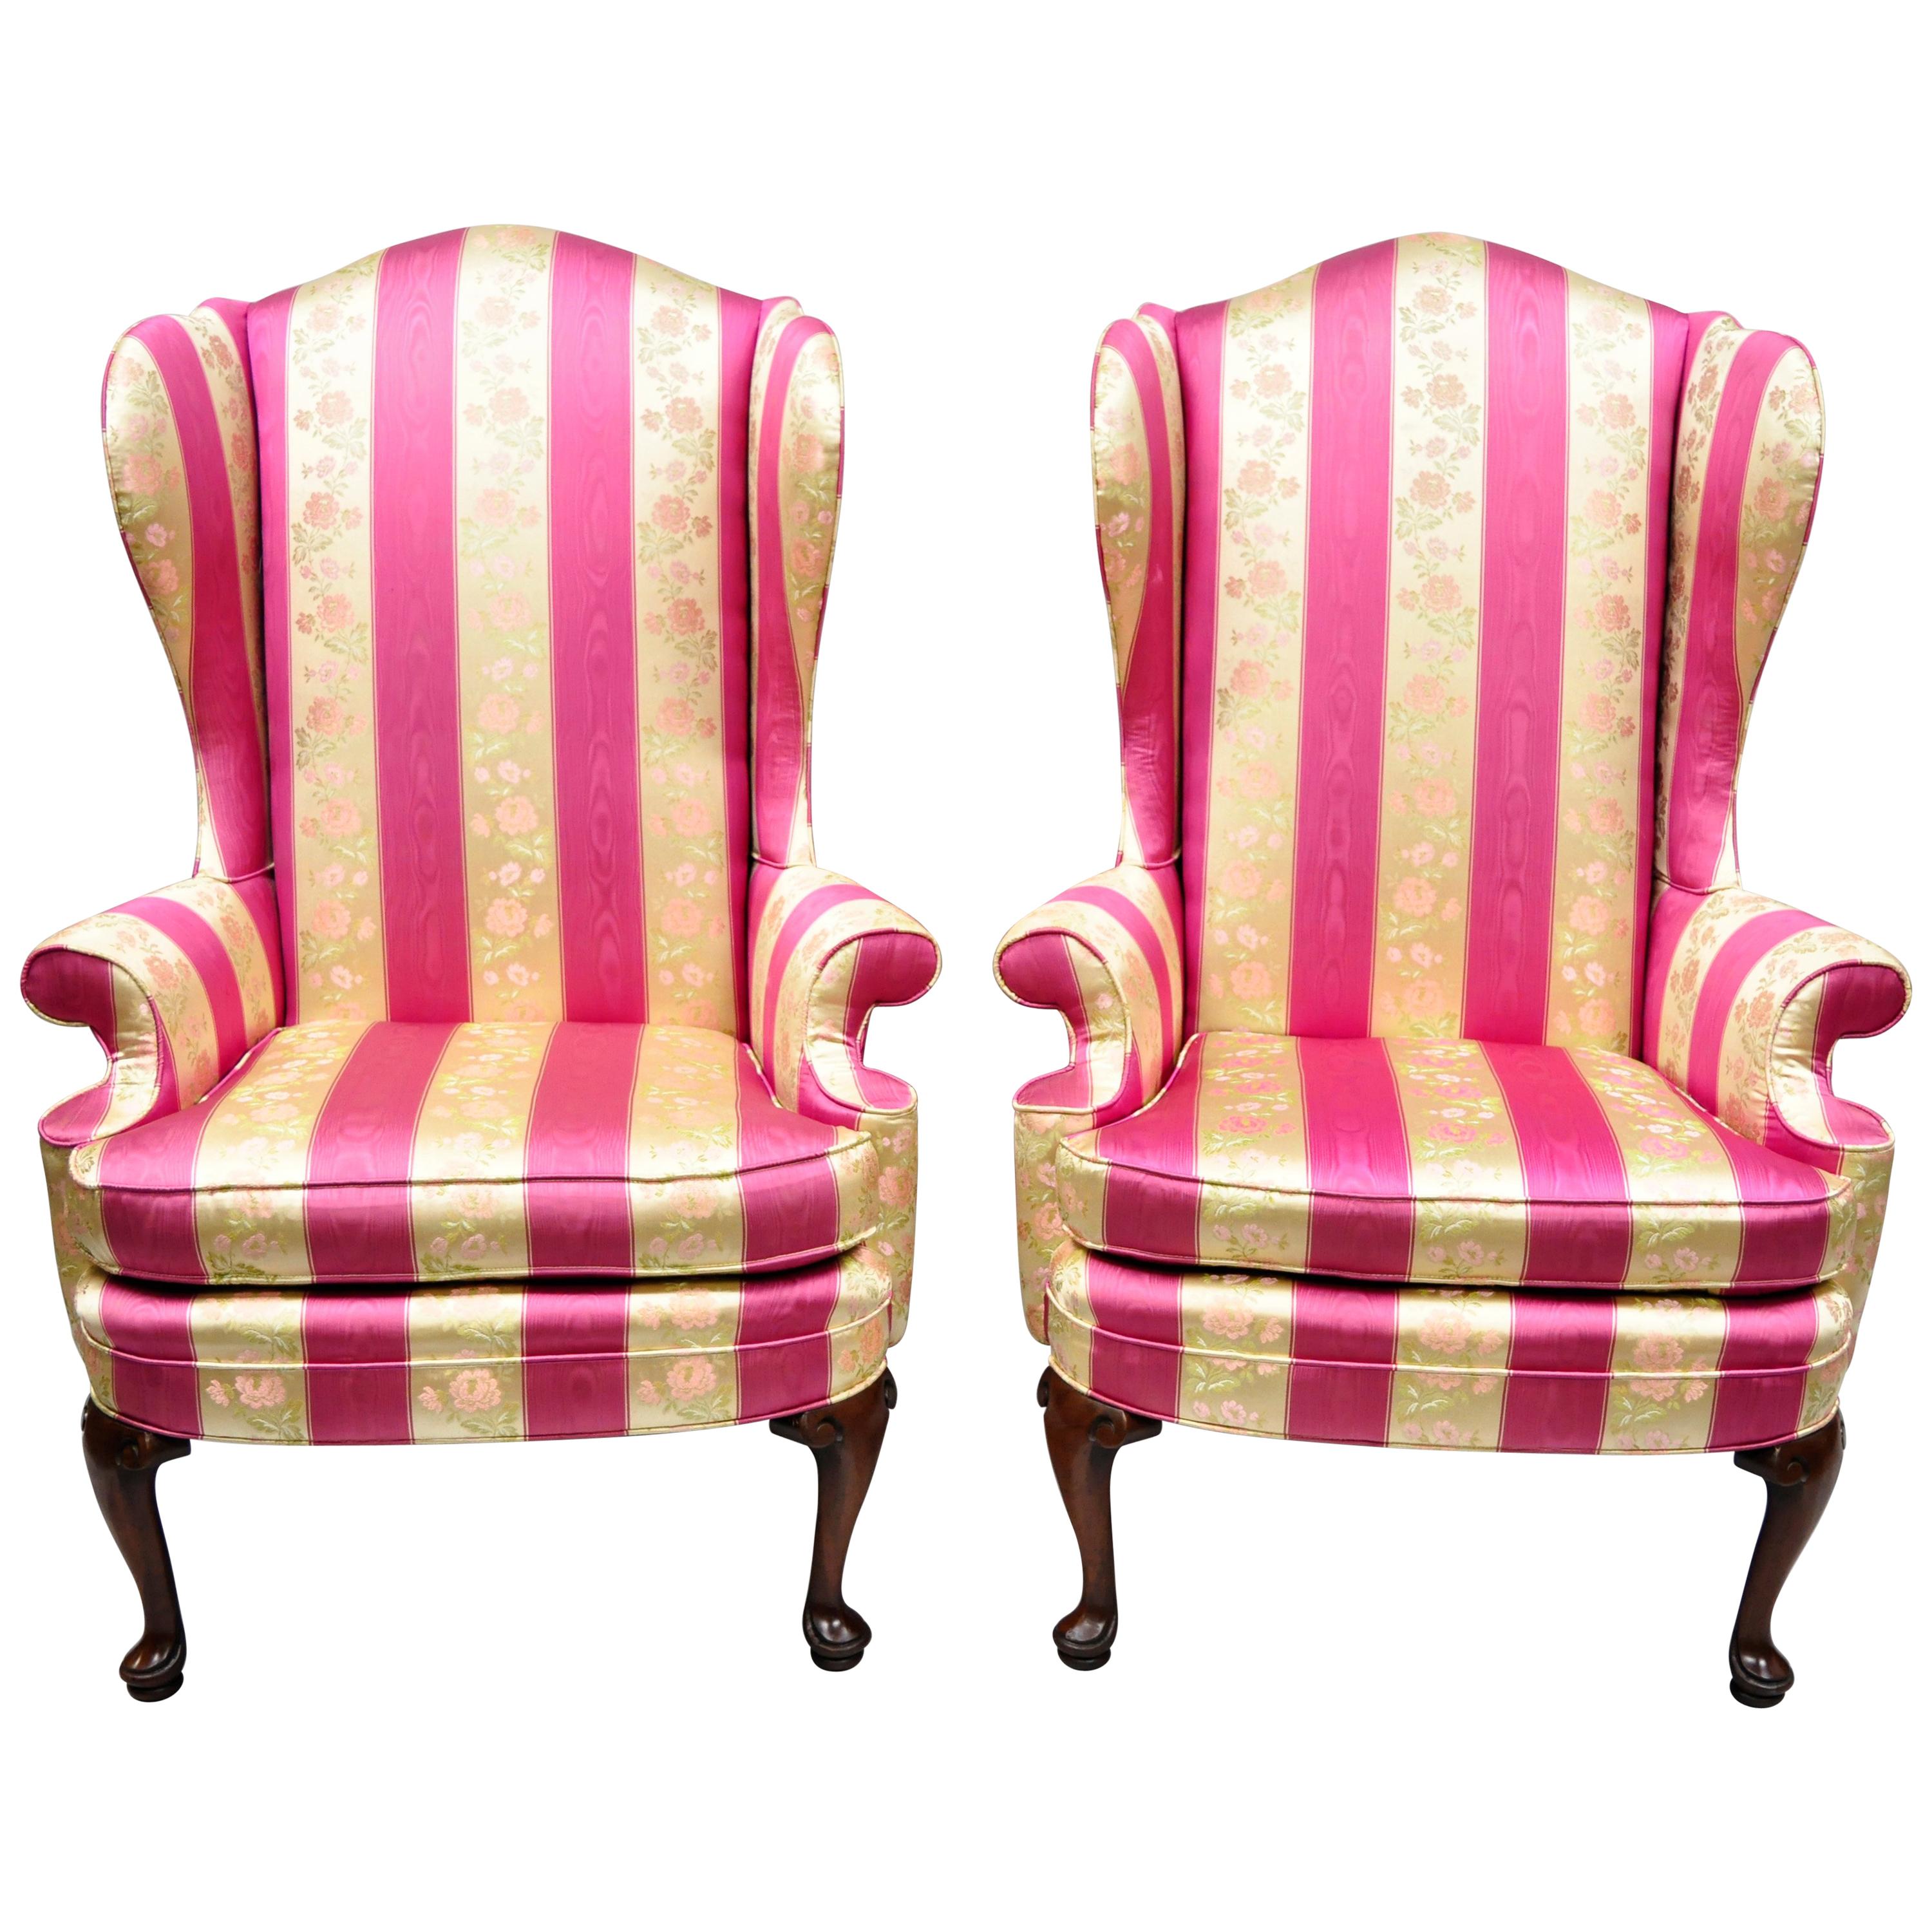 Pair of Tall High Back Pink Gold Queen Anne Wingback Arm Chairs by Statesville